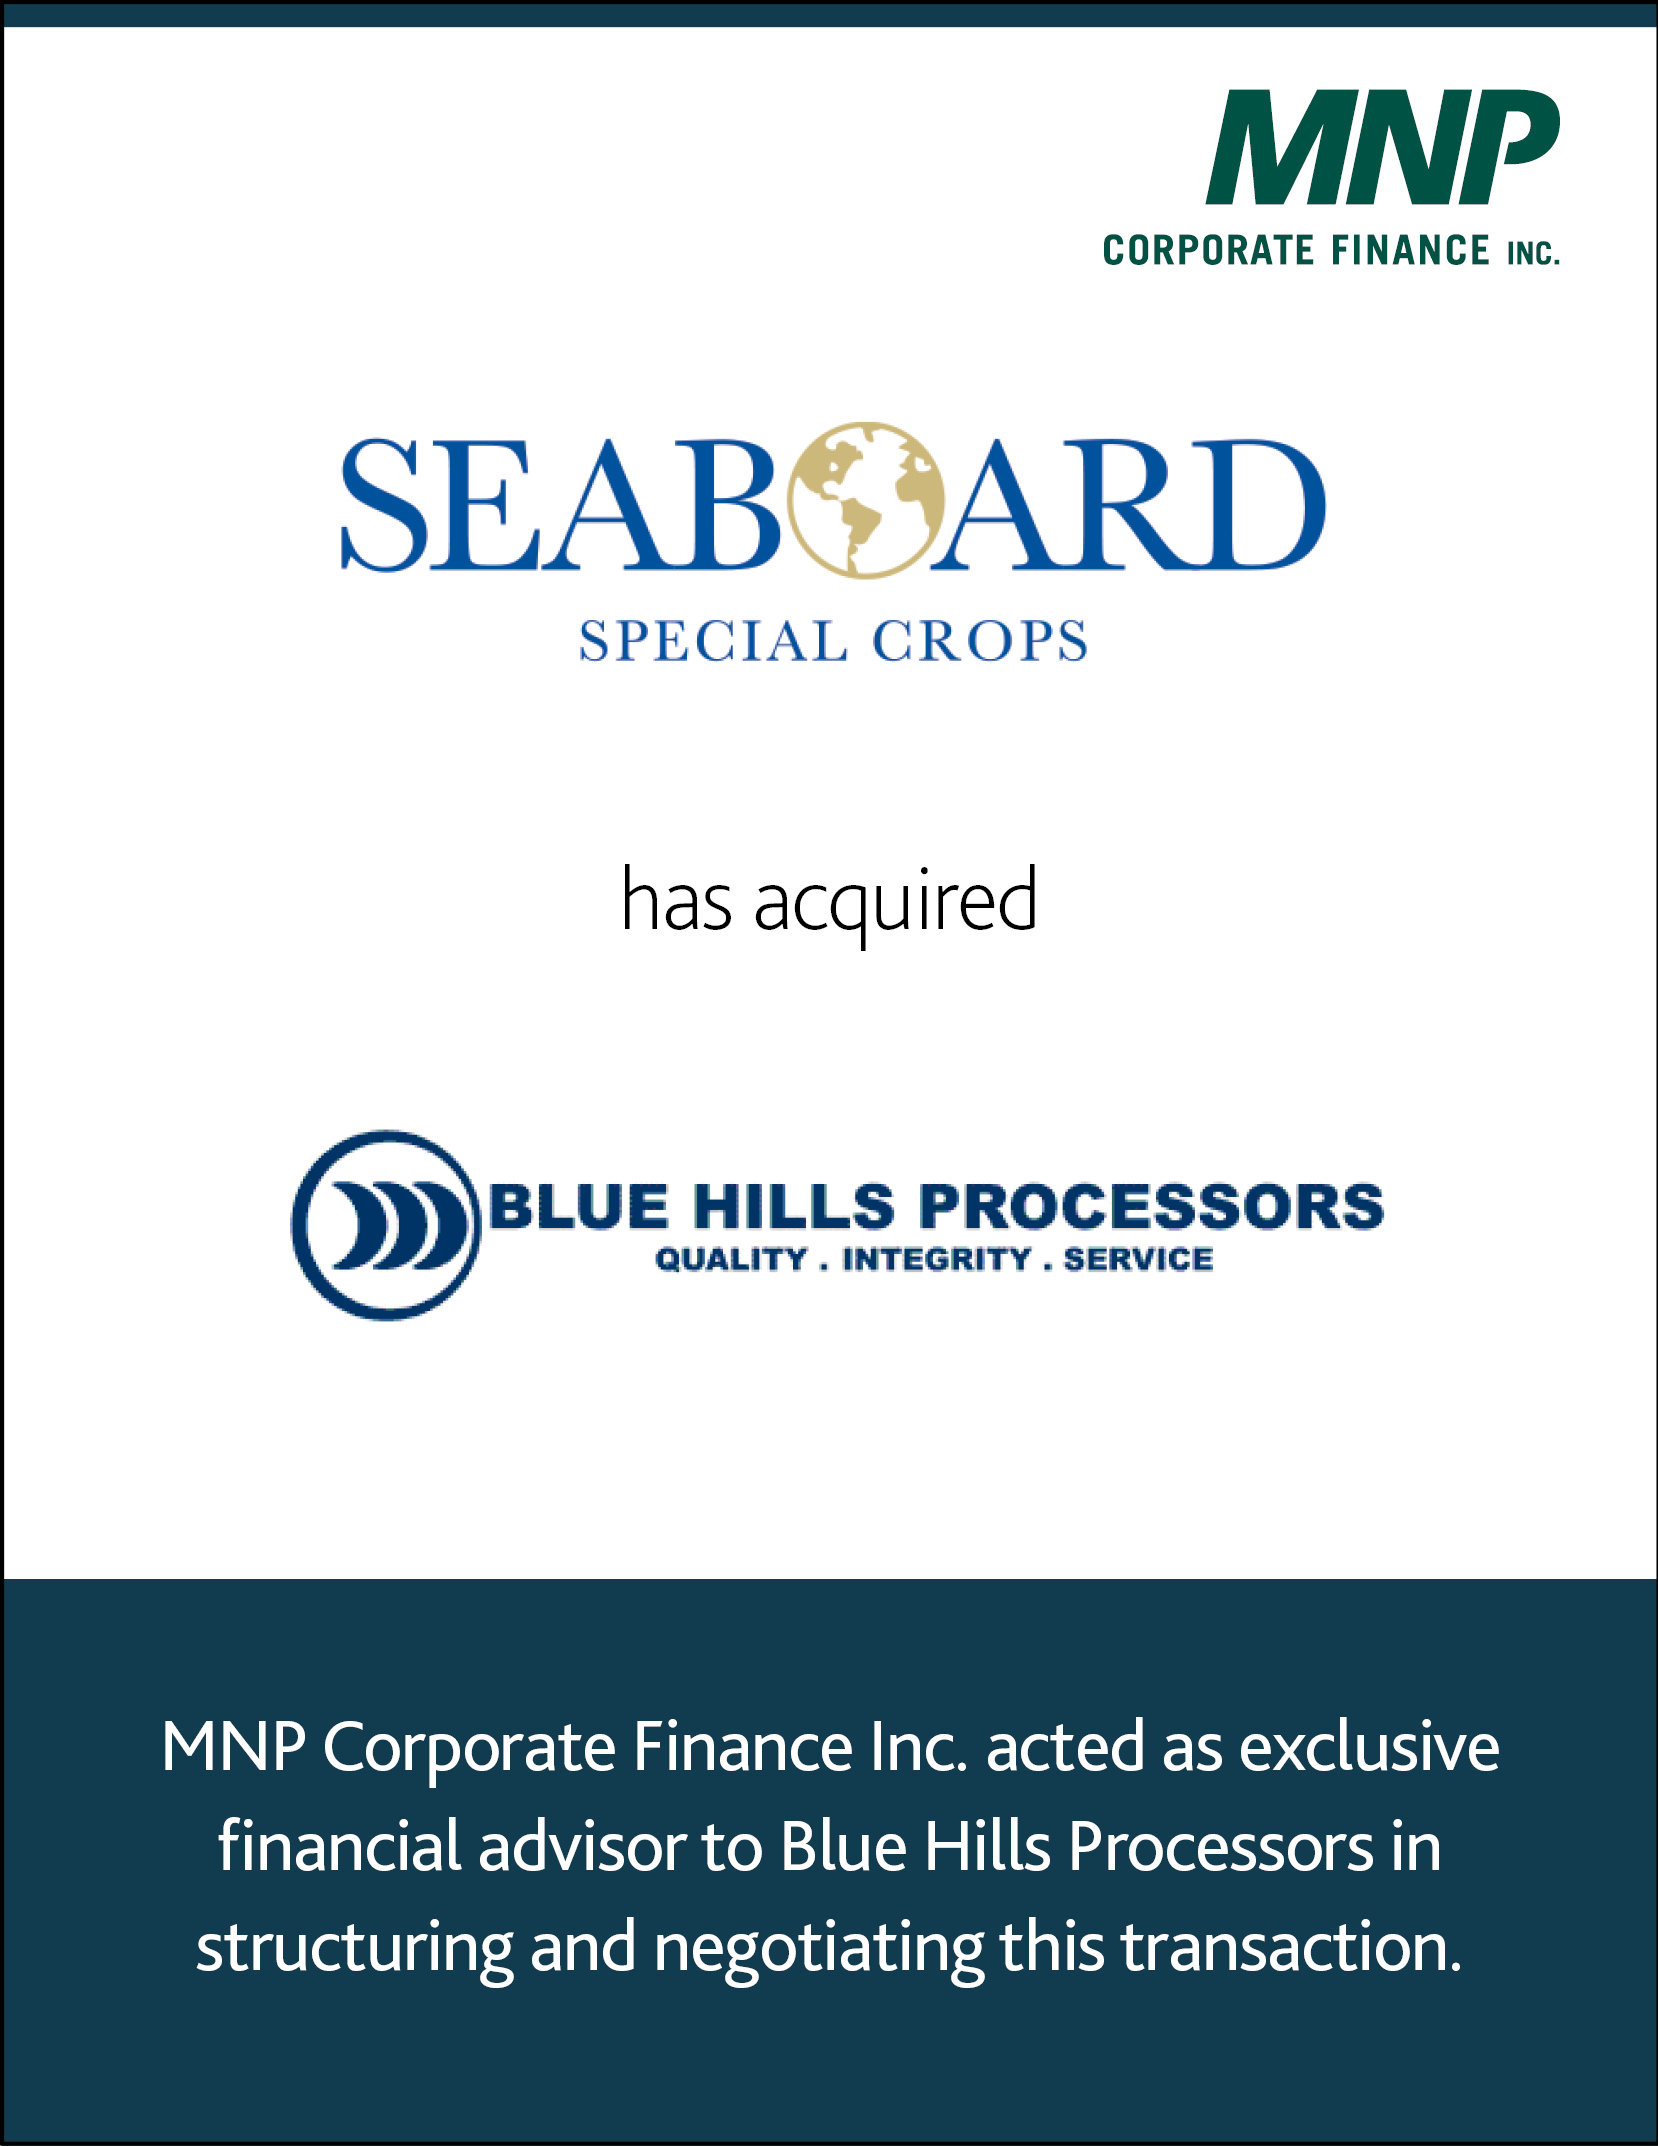 Seaboard Special Crops has acquired Blue Hills Processors.